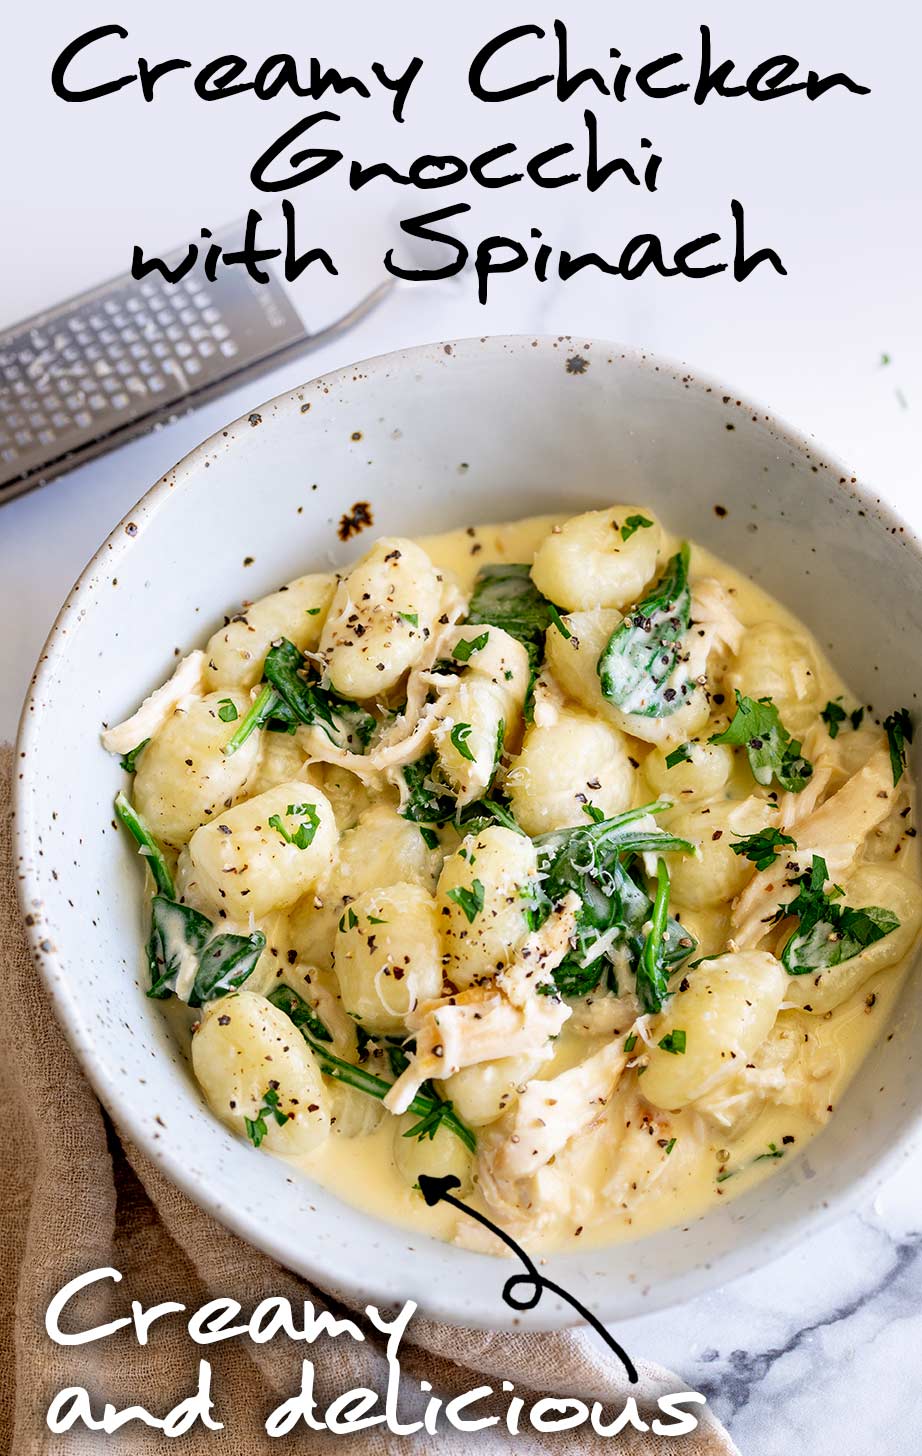 A rustic bowl filled with creamy chicken gnocchi